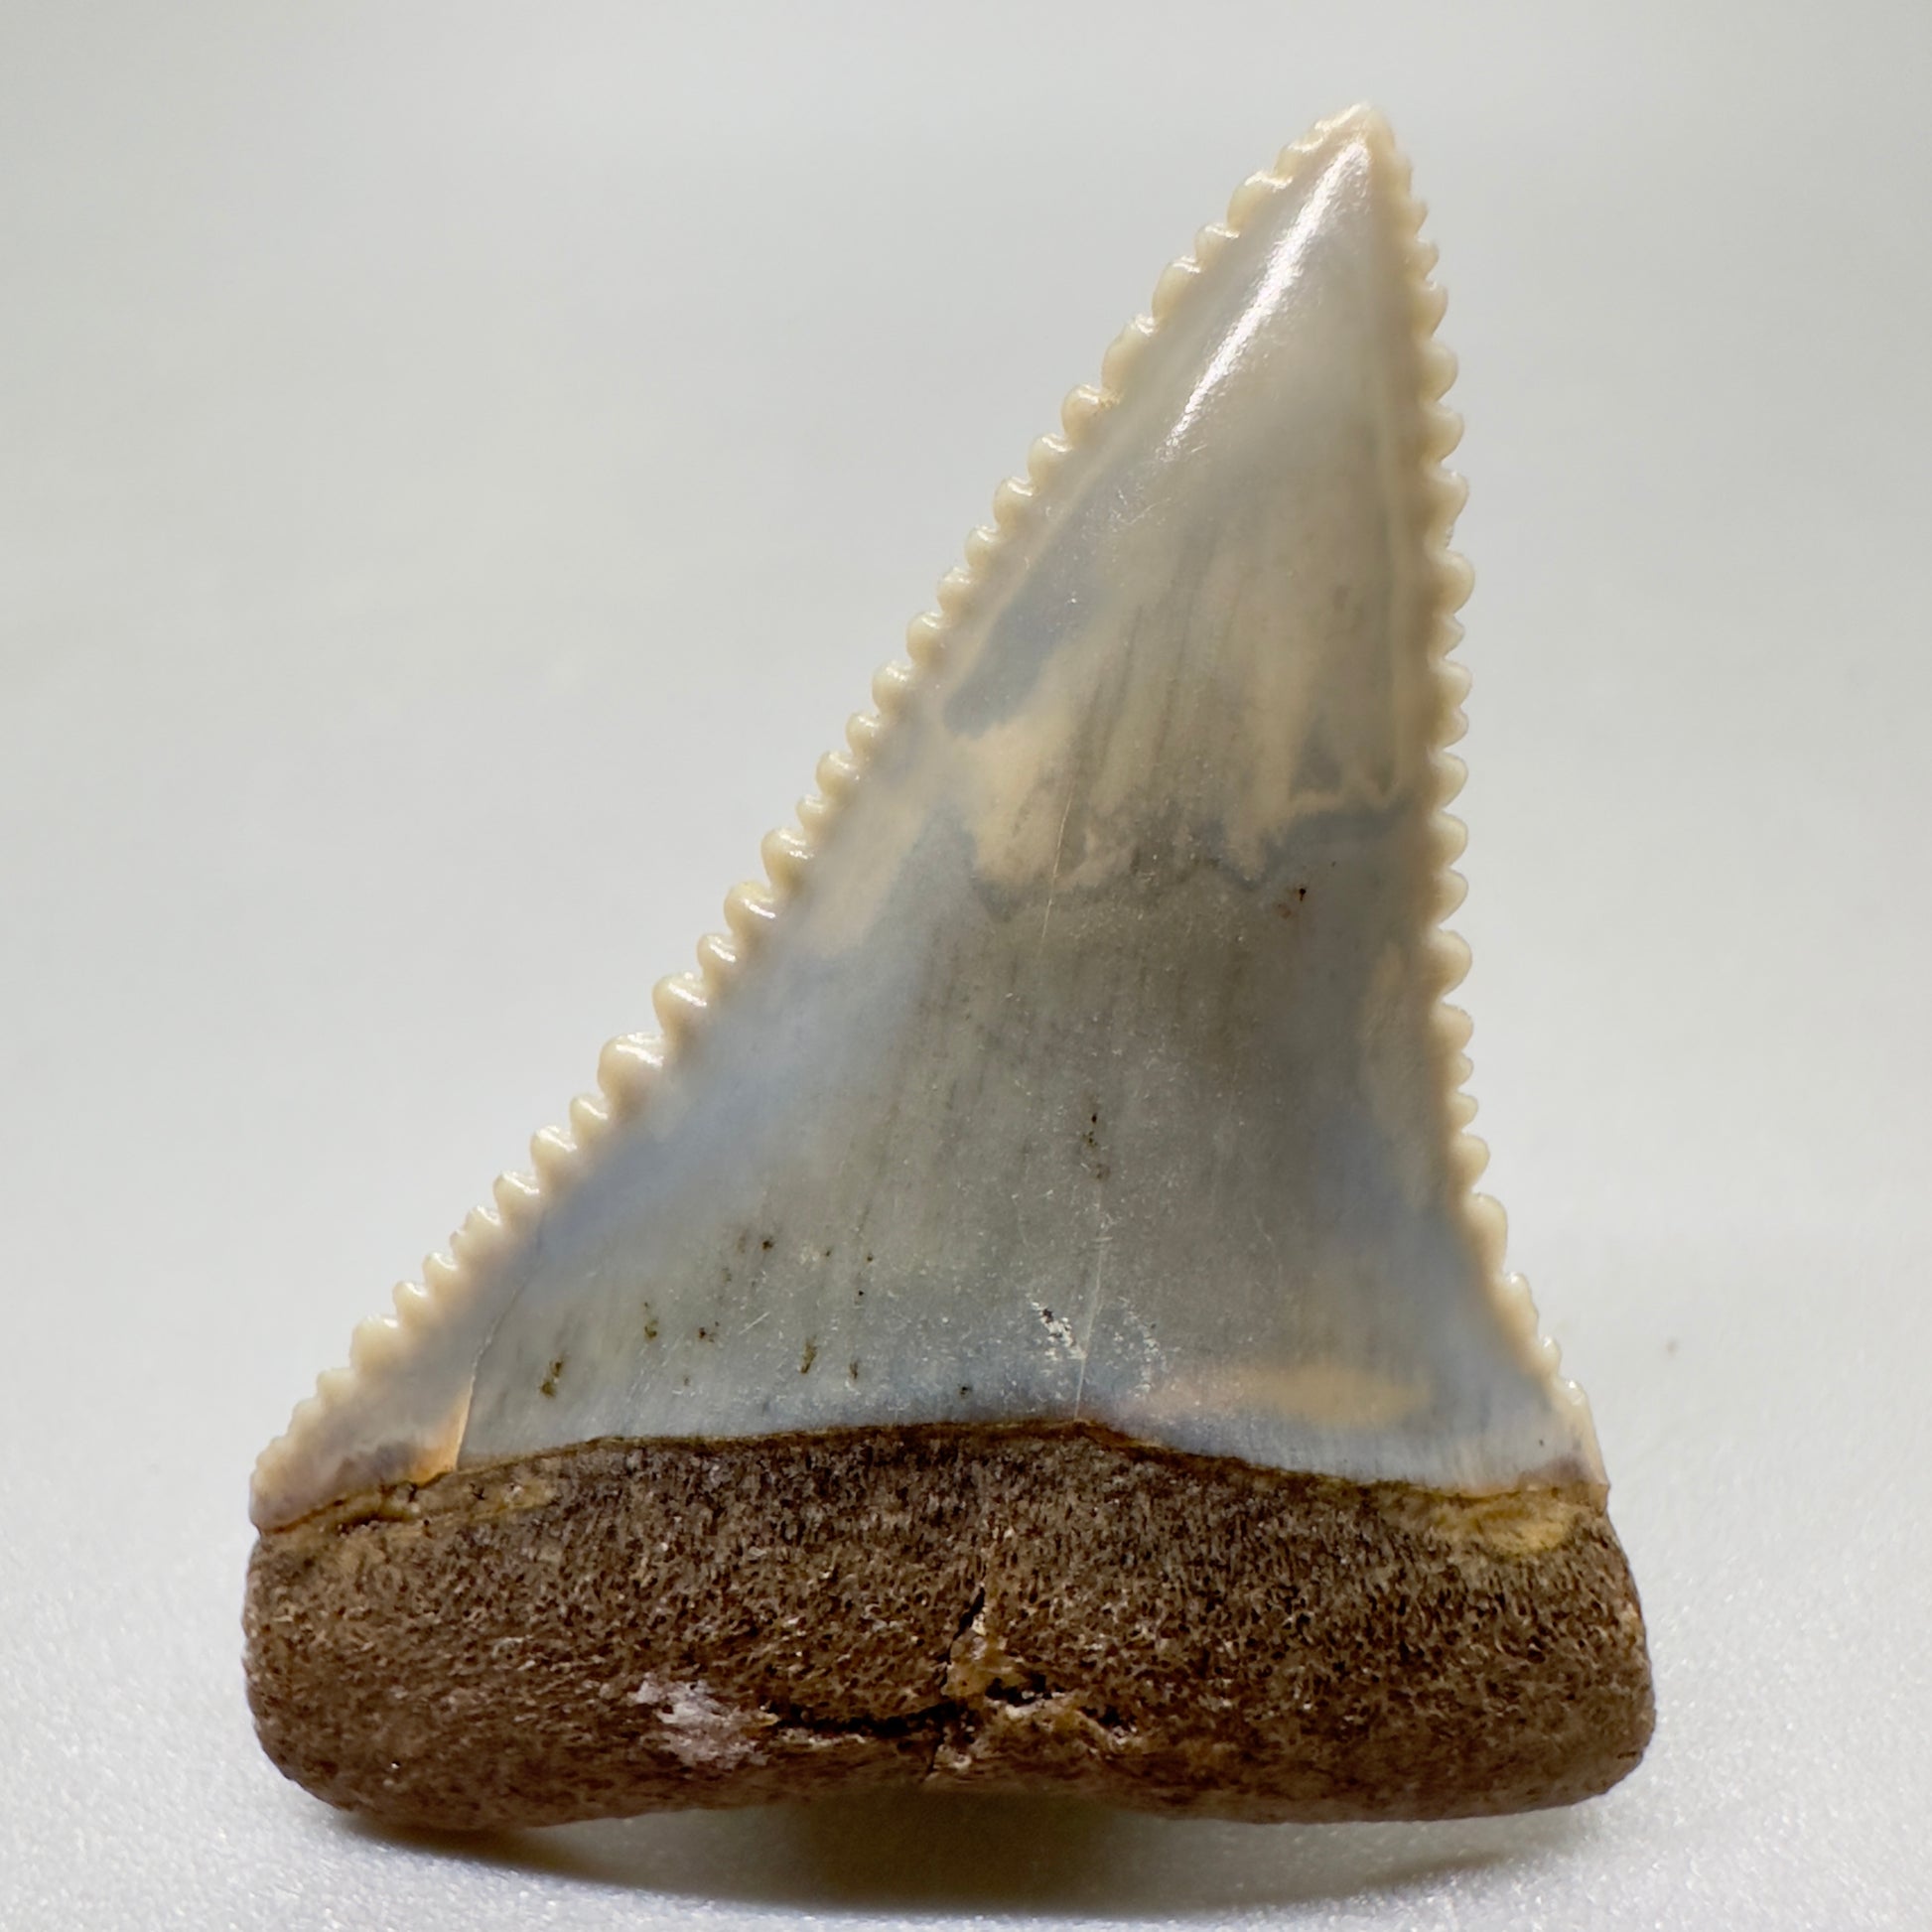 Serrated 1.51" Colorful Fossil Great White Tooth from Sacaco, Peru - Unique Collectible GW1052 - Front